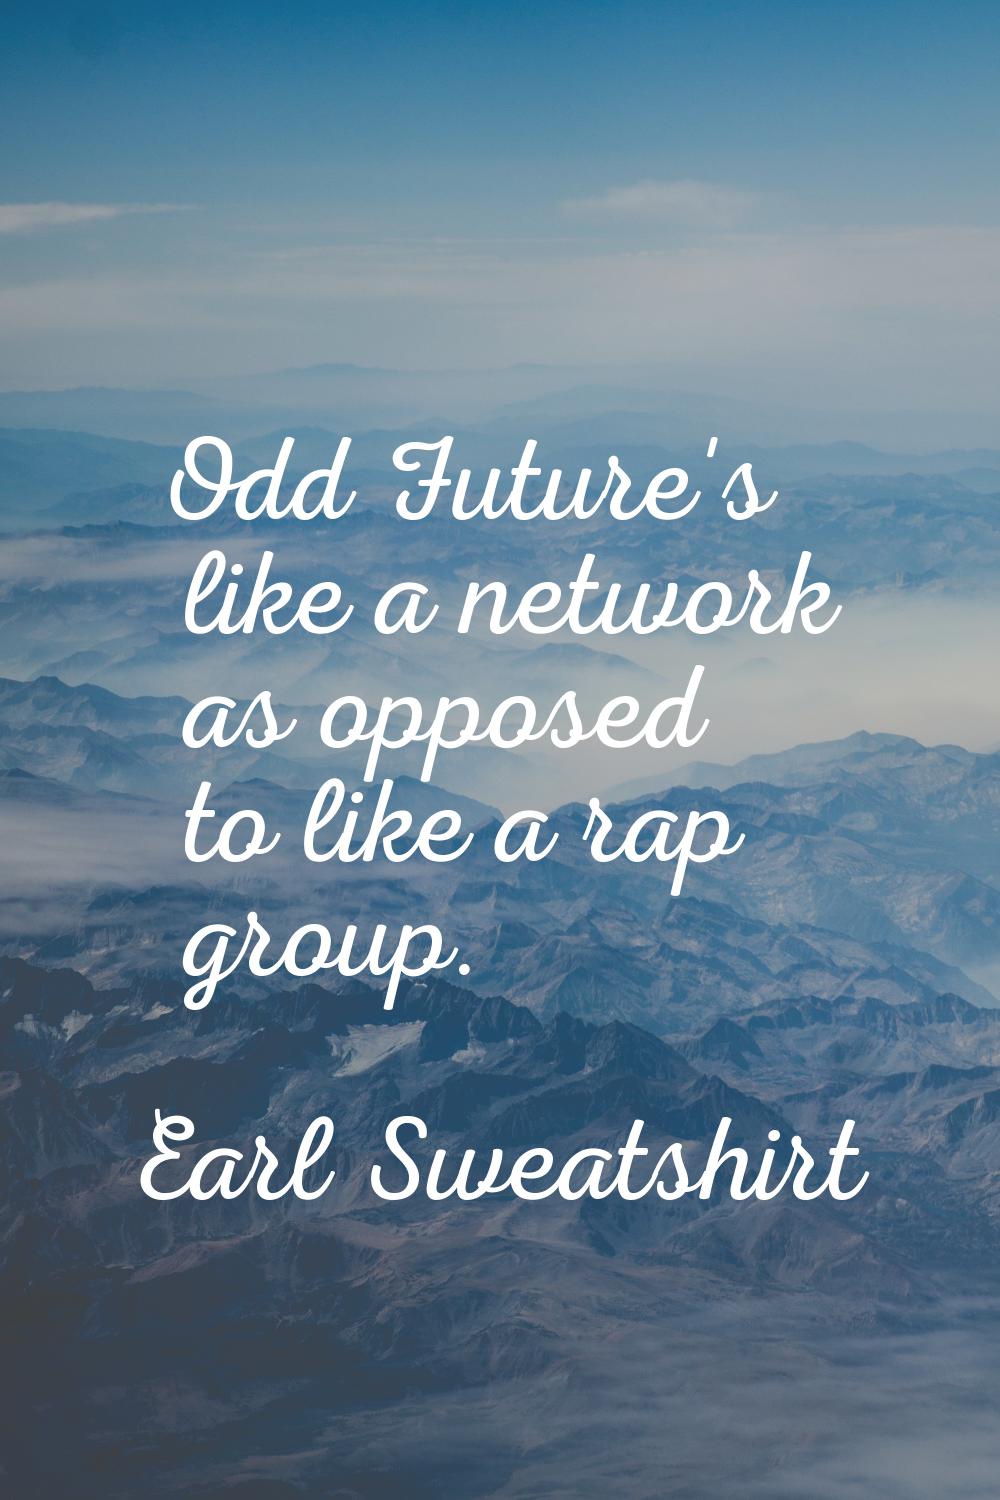 Odd Future's like a network as opposed to like a rap group.